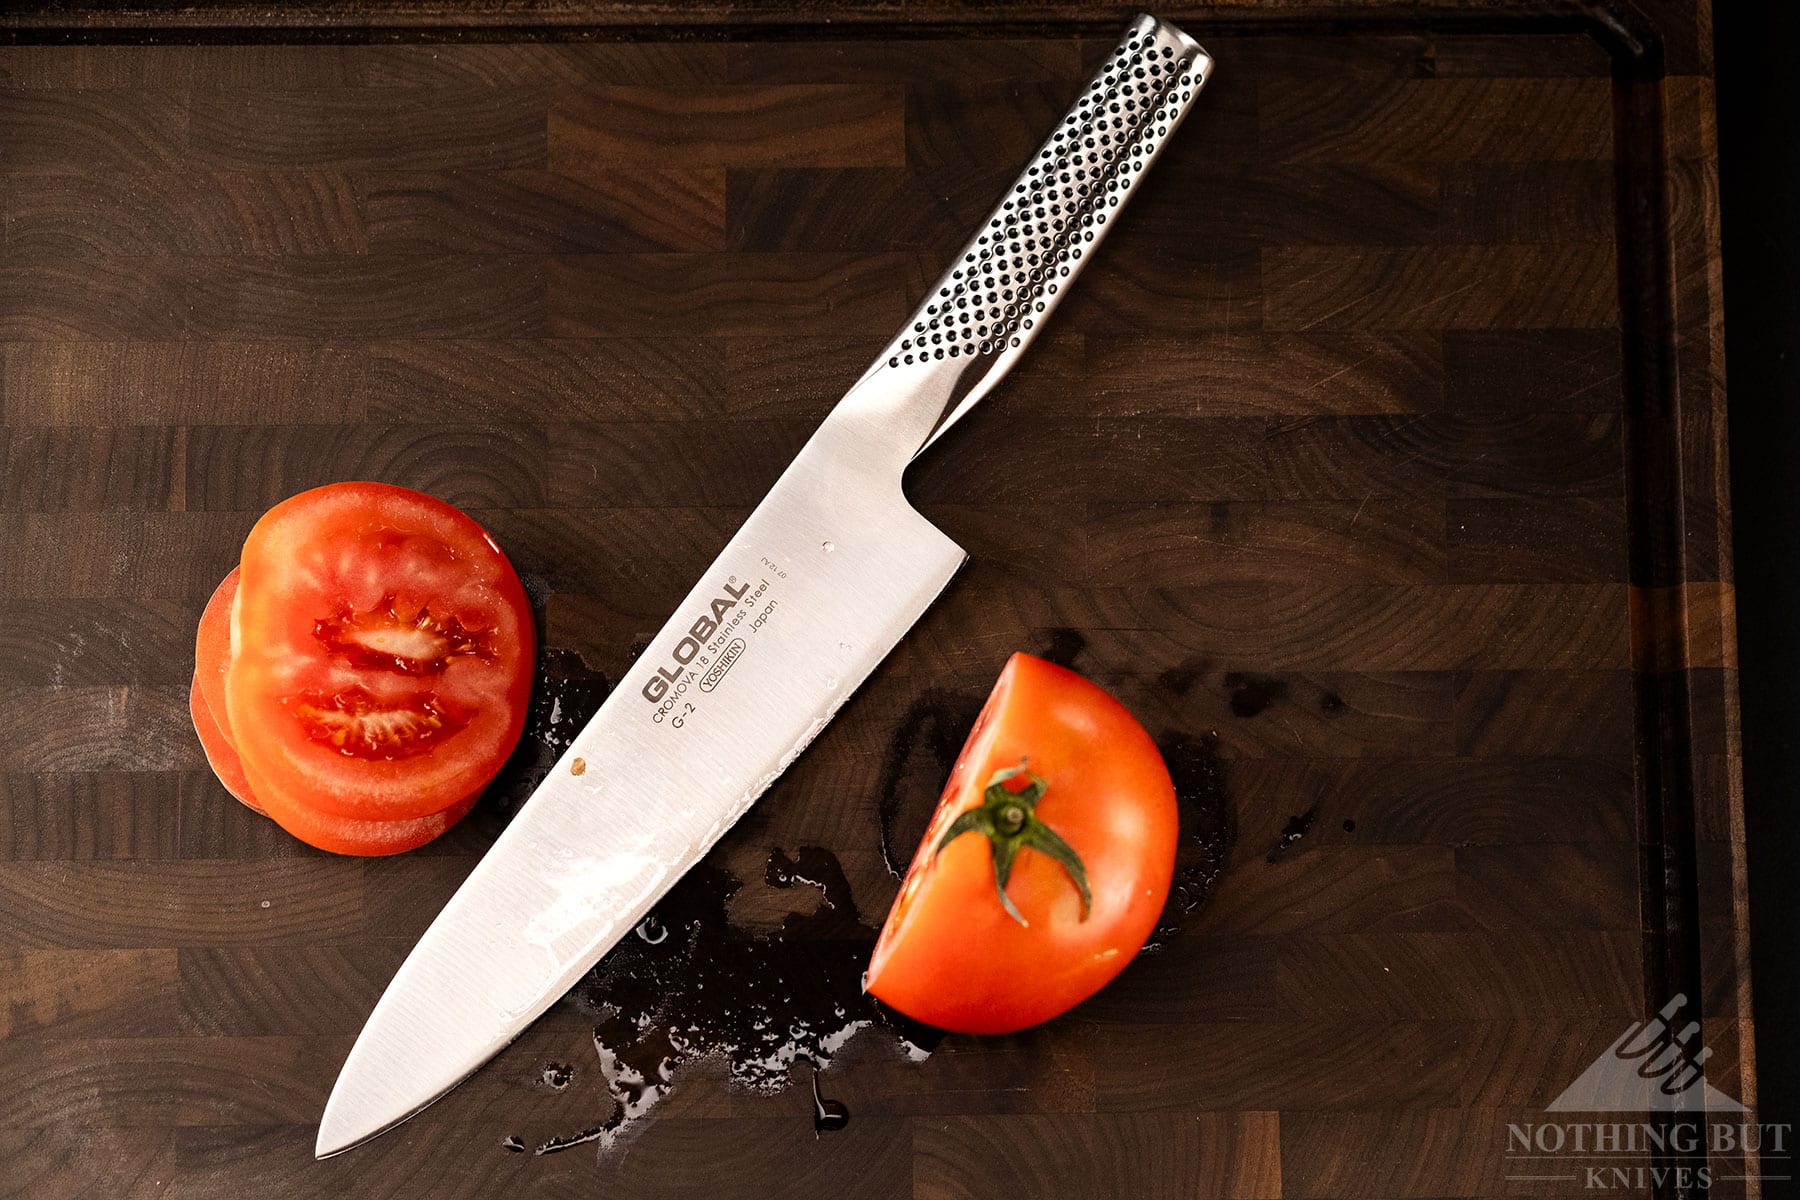 An overhead view of the 8-inch Global Japanese chef in-between two sides of a tomato it just sliced in half.